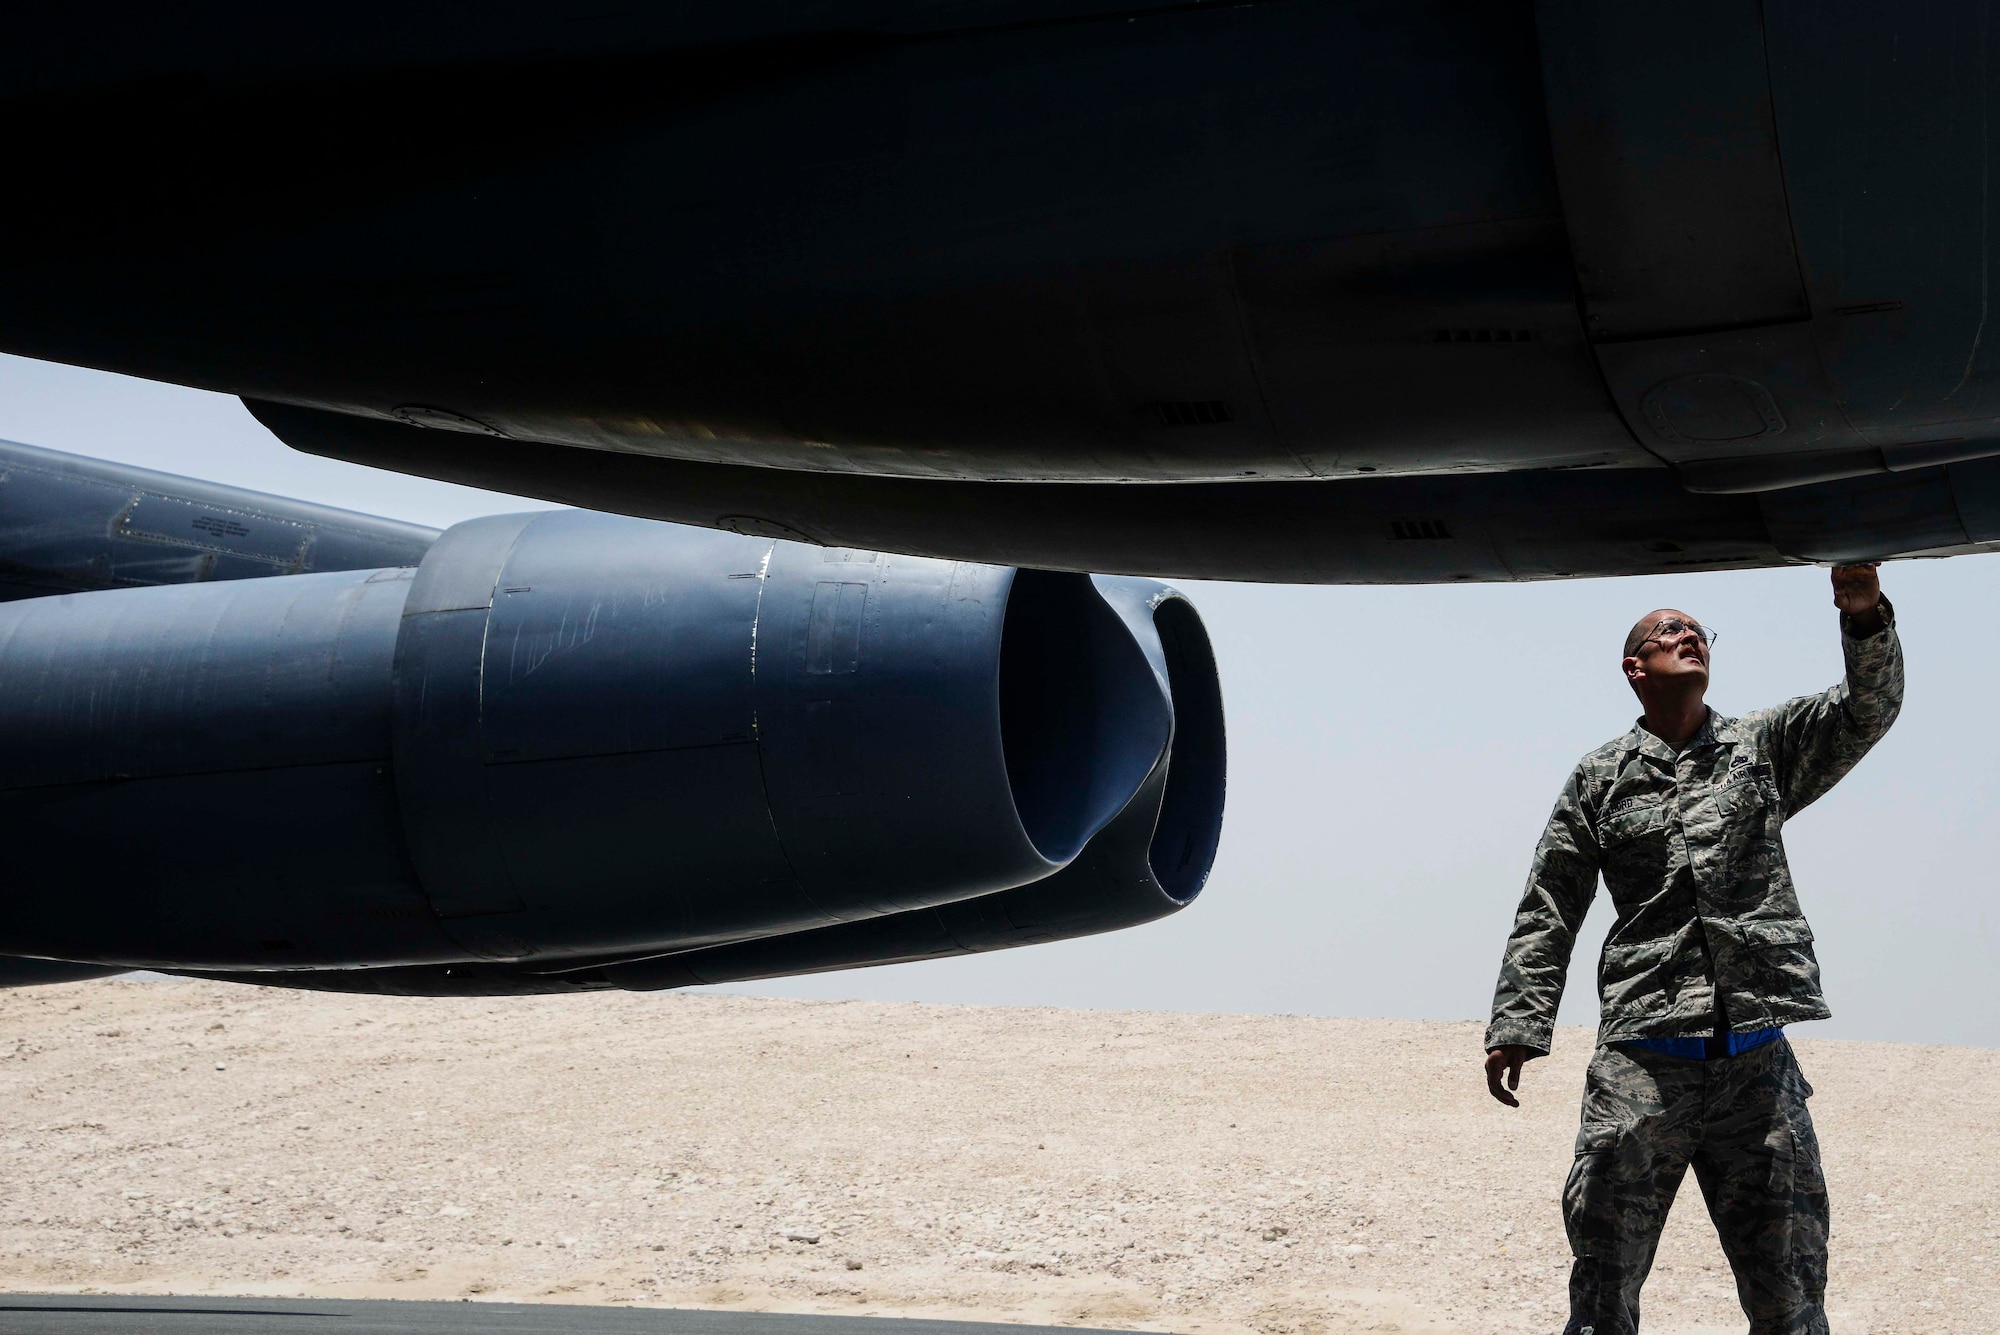 Master Sgt. Jeremy Michael Hord, 379th Aircraft Maintenance Squadron aircraft section chief, checks the screws of a B-52 Stratofortress May 20, 2016, at Al Udeid Air Base, Qatar. Hord achieved a career milestone when he launched his third type of bomber, a B-52 Stratofortress, into combat April 14 here. Now, Hord can say he has launched every type of bomber currently serving in the U.S. Air Force’s fleet. (U.S. Air Force/Senior Airman Janelle Patiño/Released)